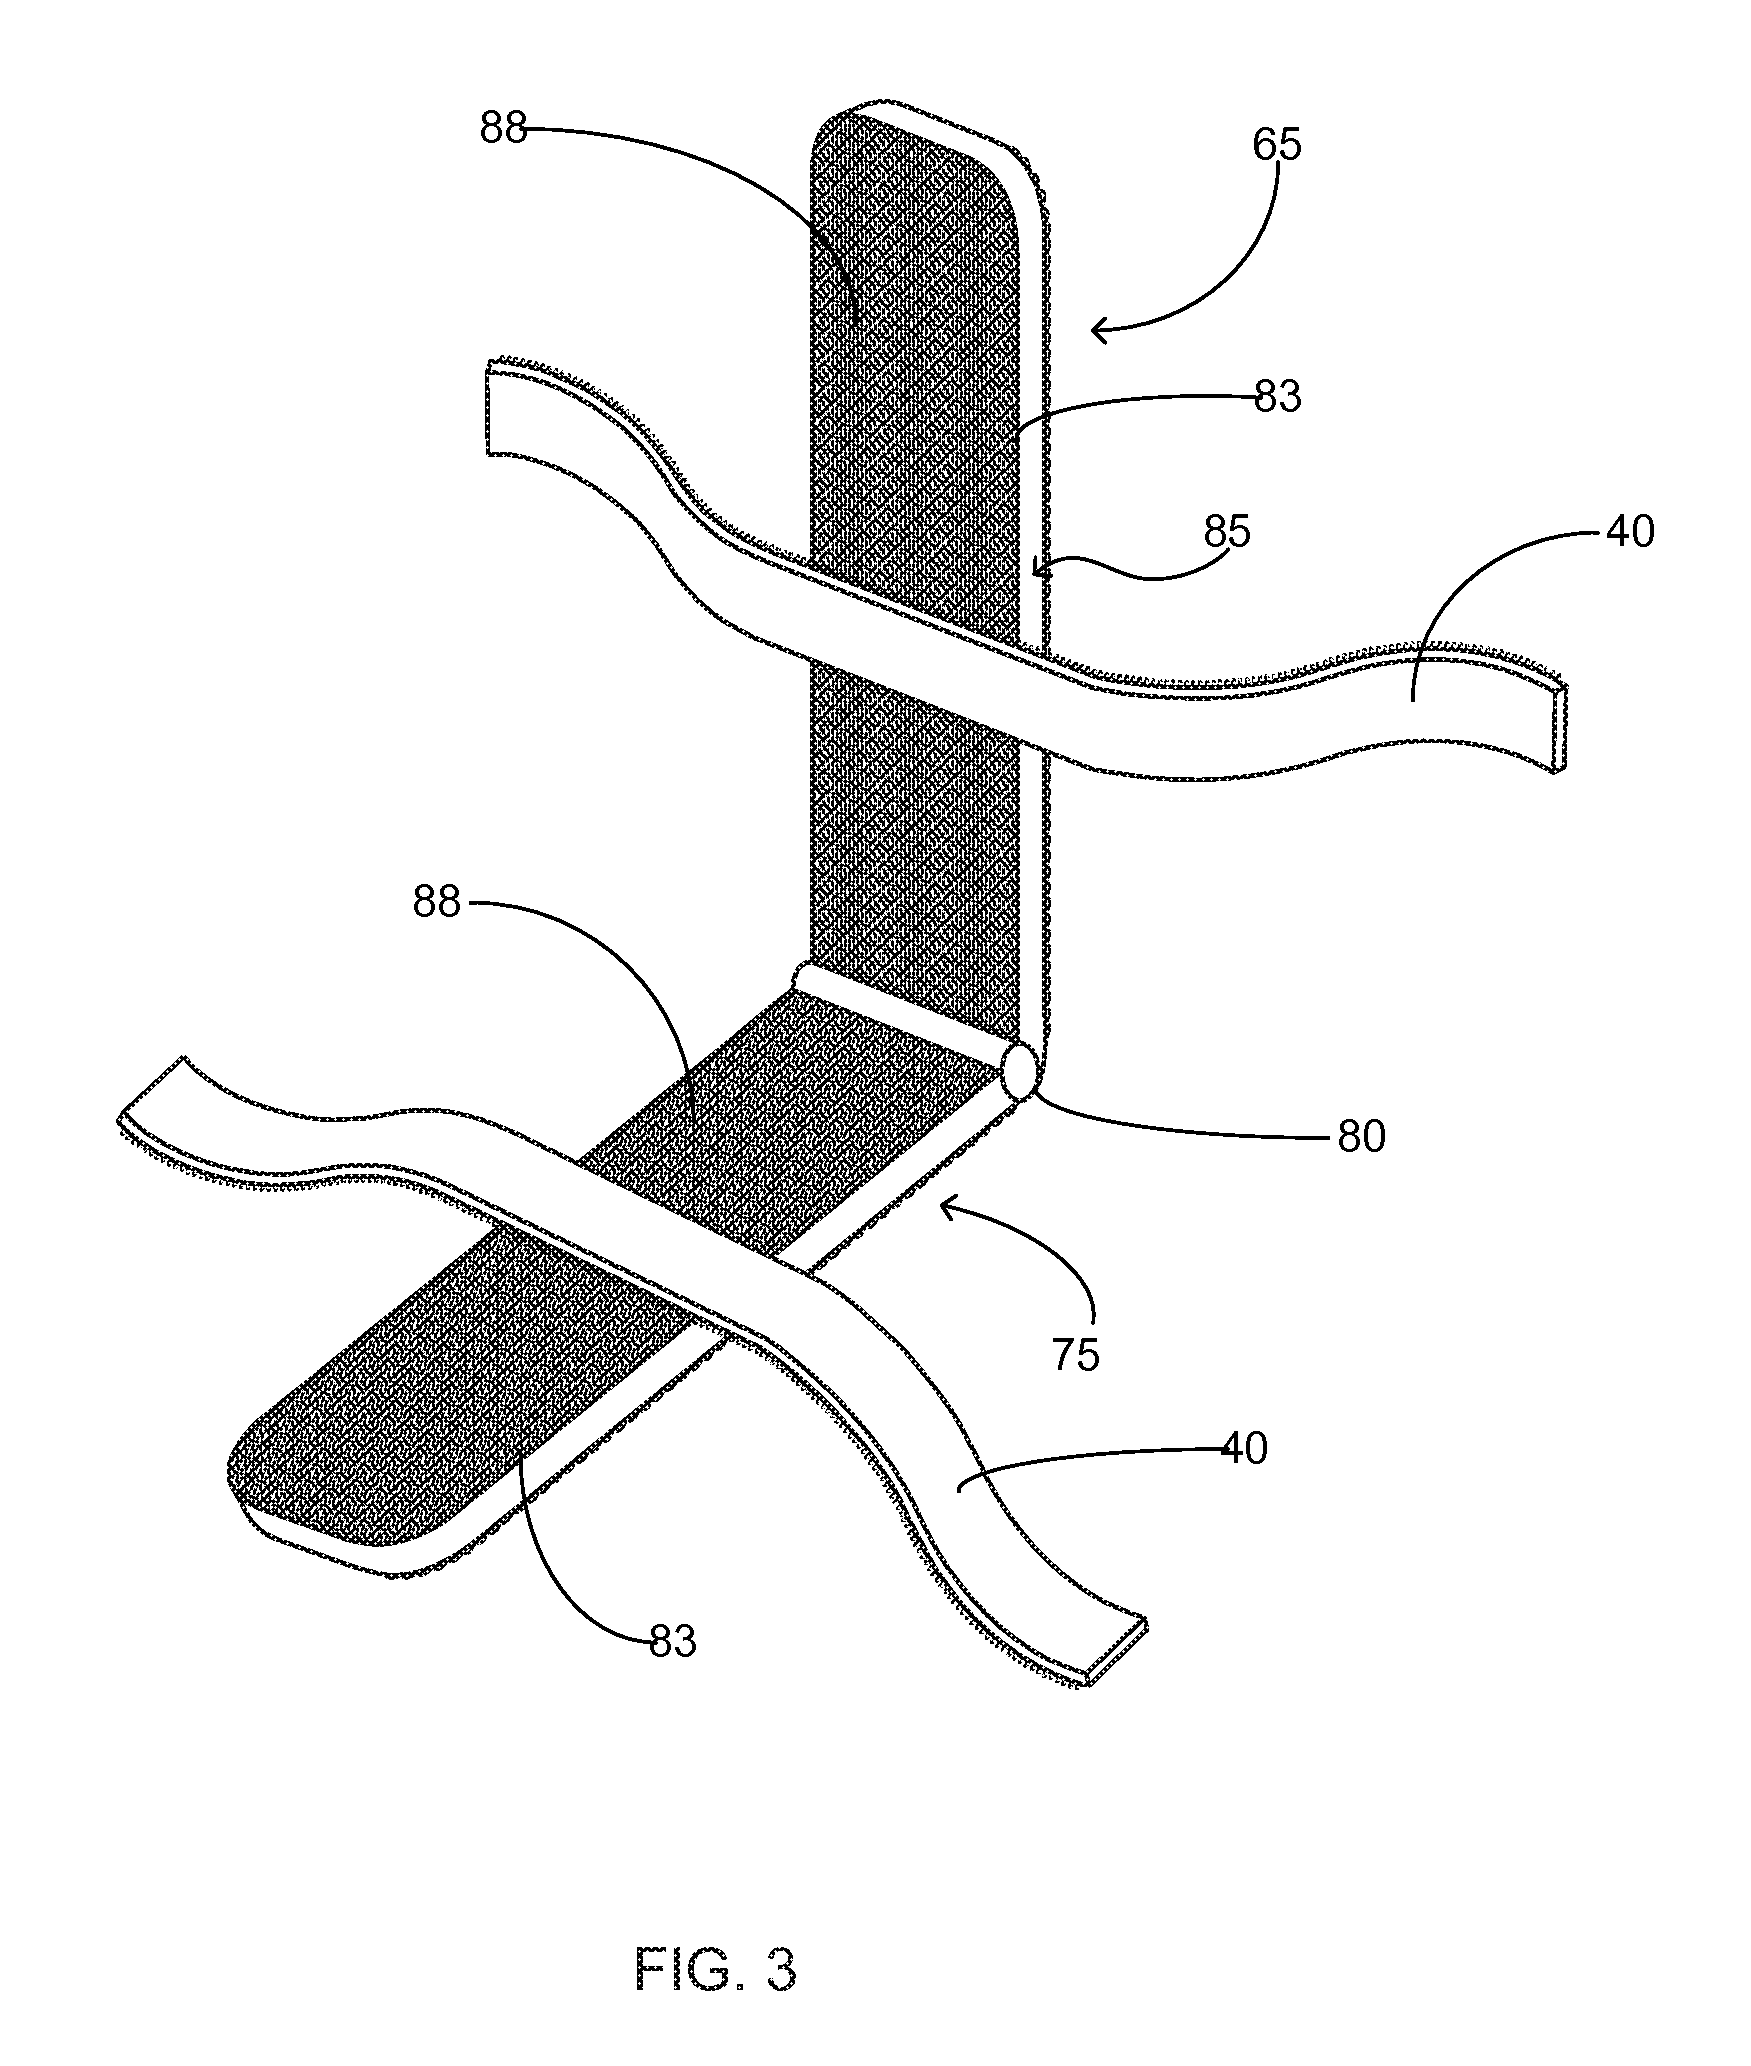 Foot pain treatment device and method of use